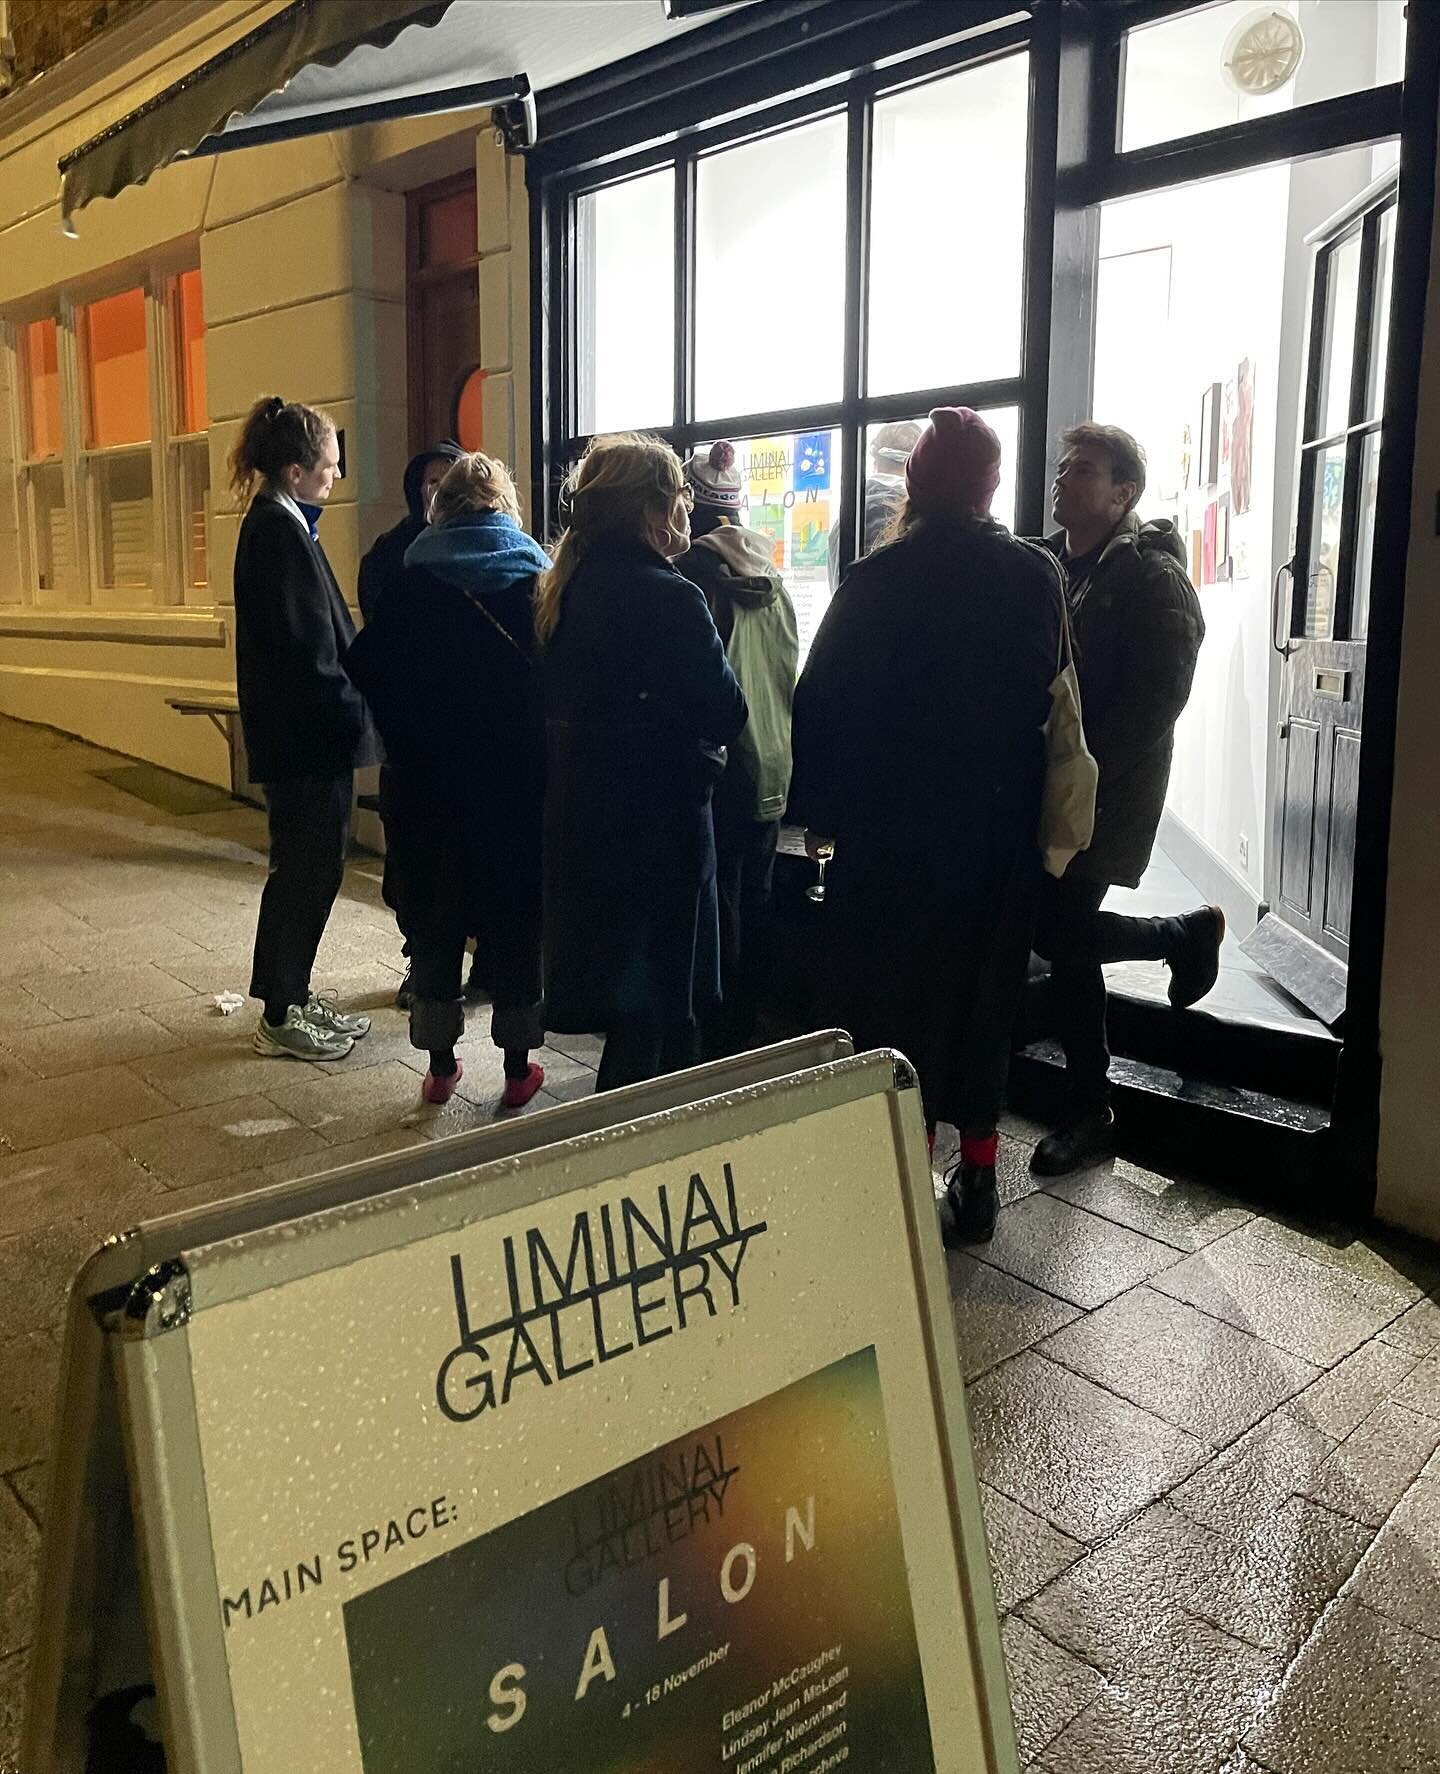 Really enjoyed the &lsquo;Liminal Salon&rsquo; PV last week, thanks to everyone that braved storm Ciaran to make it ⛈️

&lsquo;Liminal Salon&rsquo;, a group exhibition @liminal_gallery spotlighting 25 artists who have exhibited in our Margate gallery